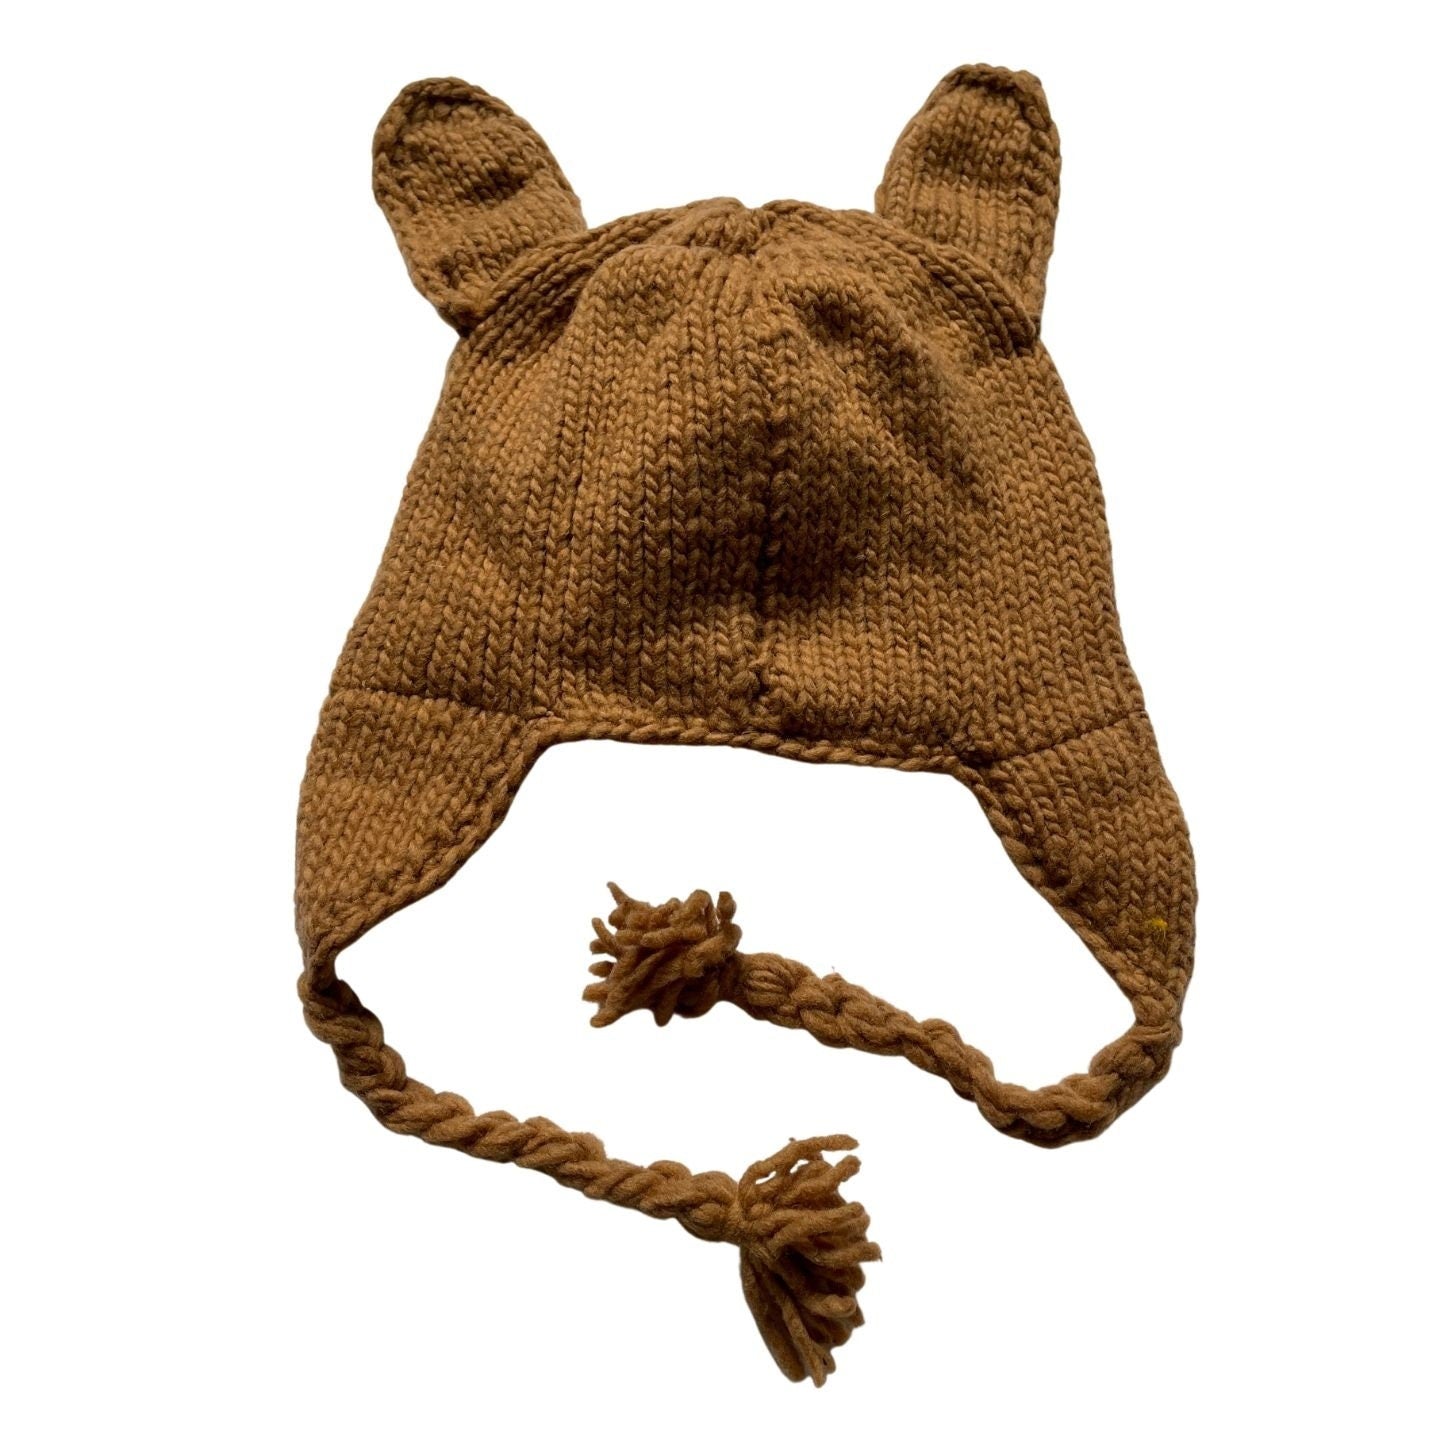 Warm and Cozy Golden Retriever Dog Beanie Hat for Kids